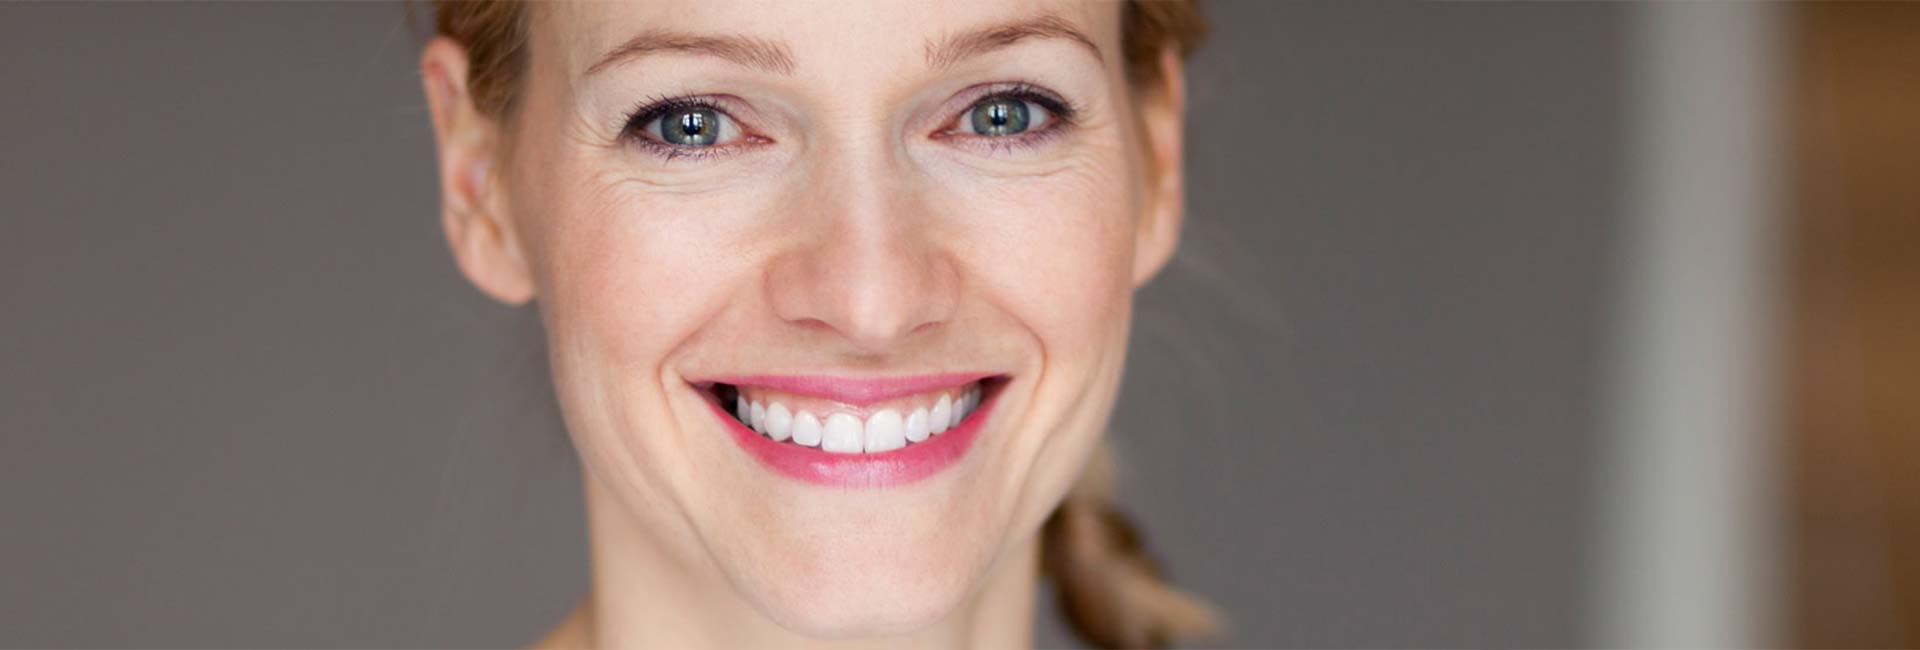 Closeup of a woman smiling with white teeth